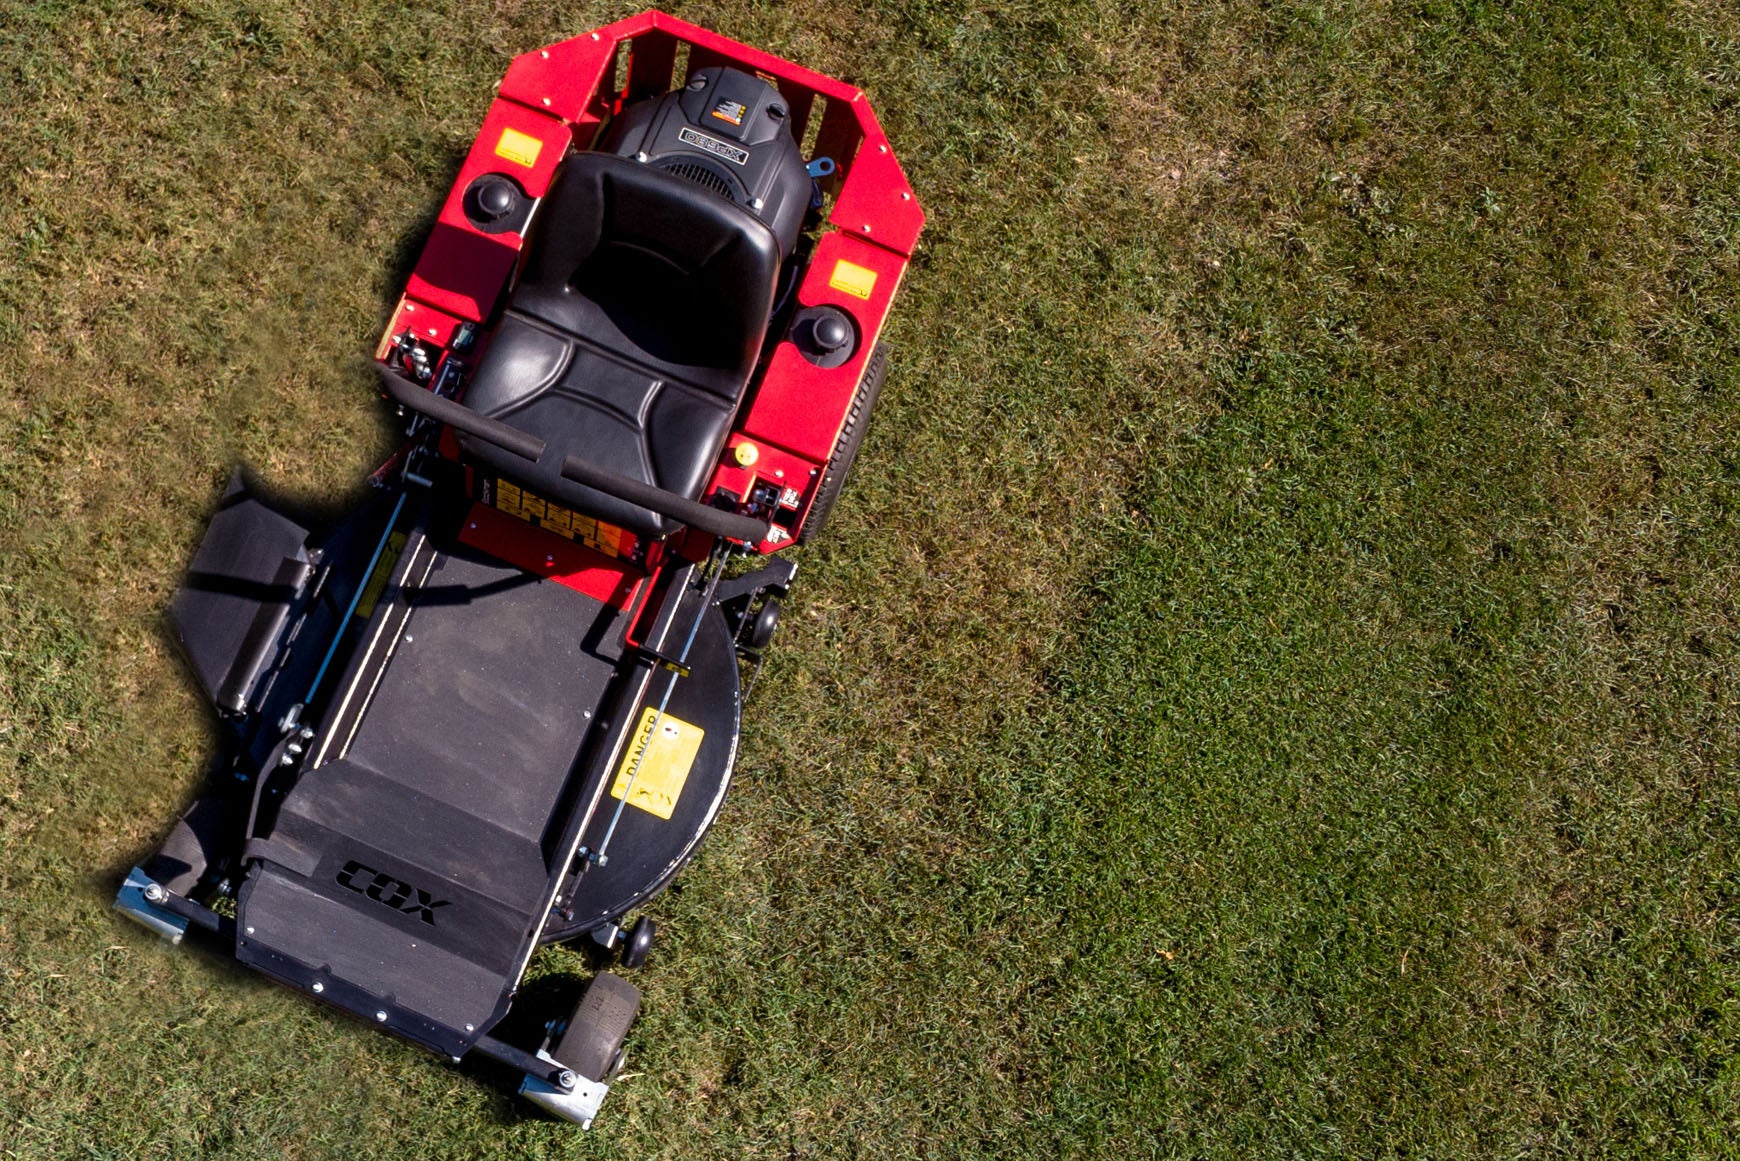 At last, a Zero Turn mower that excels at both taming thick grass and nurturing your lawns! The Compact ZTR 35 effortlessly navigates through standard backyard entrances, measuring a mere 940mm in width (35″ Model).